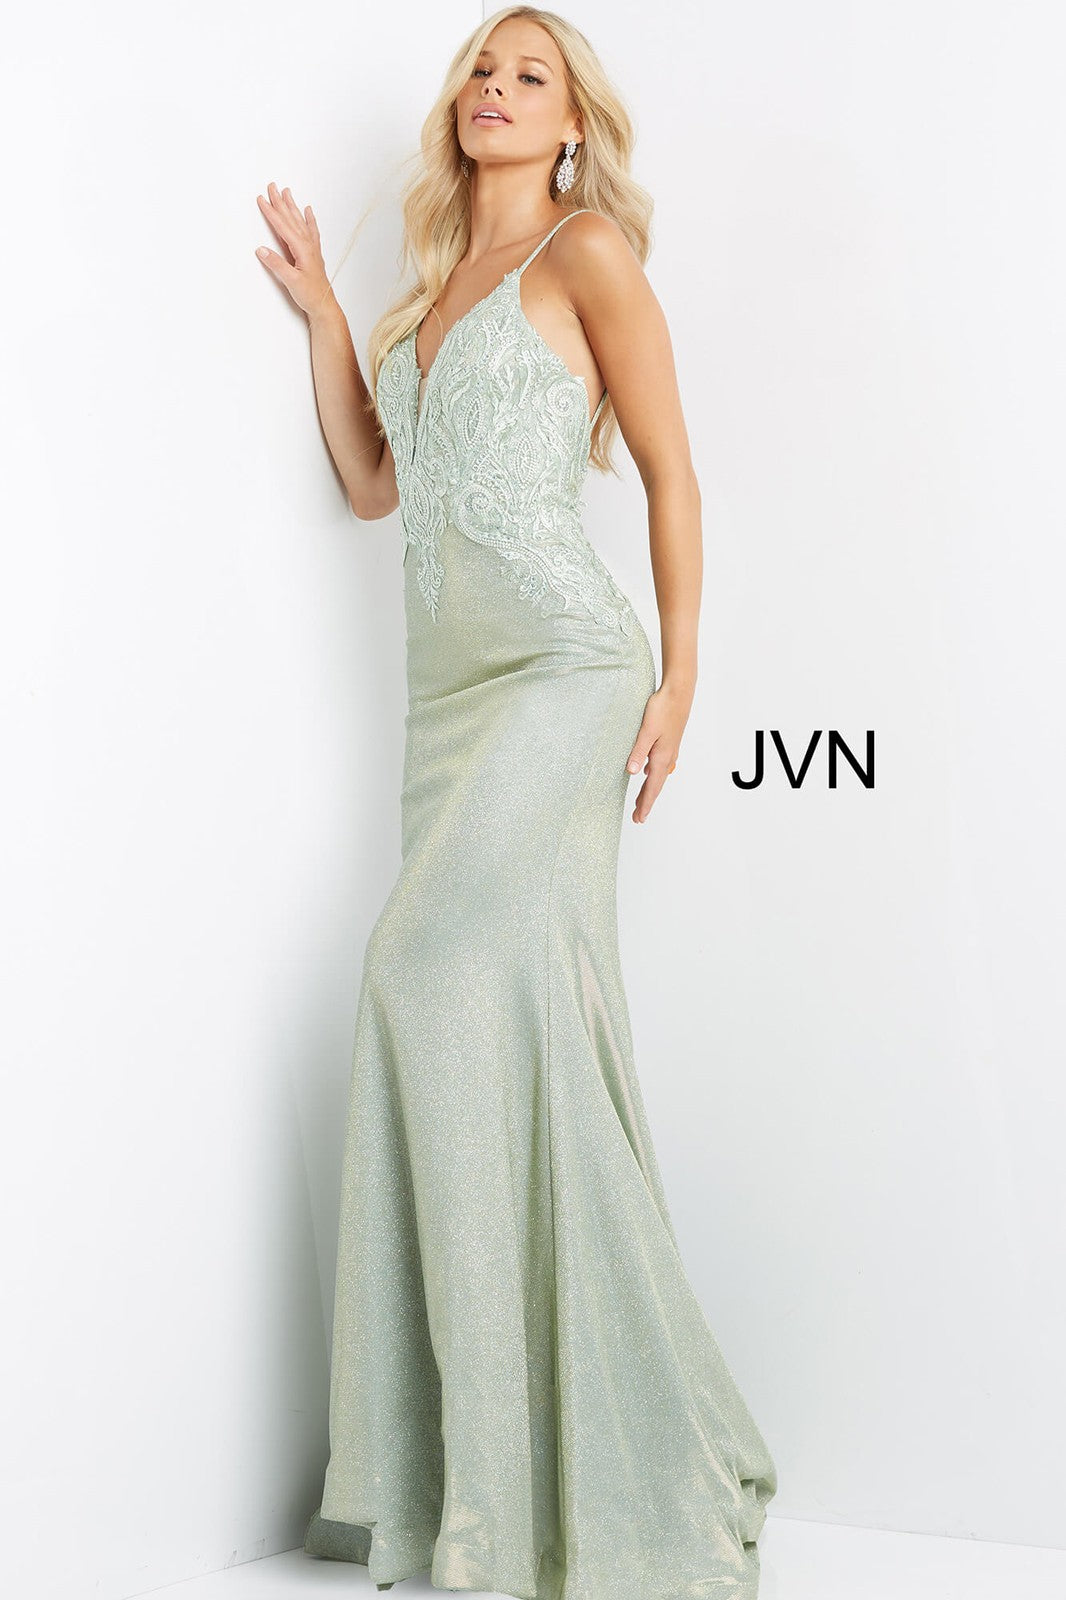 This JVN by Jovani JVN08492 light green prom gown has a fit and flare silhouette in stretch glitter, with a sheer inset plunging neckline and spaghetti straps. Tonal embroidery embellishes the bodice of this backless formal dress, finished with a horsehair hem and sweep train.  Available Sizes: 00-24  Available Colors: Light Green, Light Blue